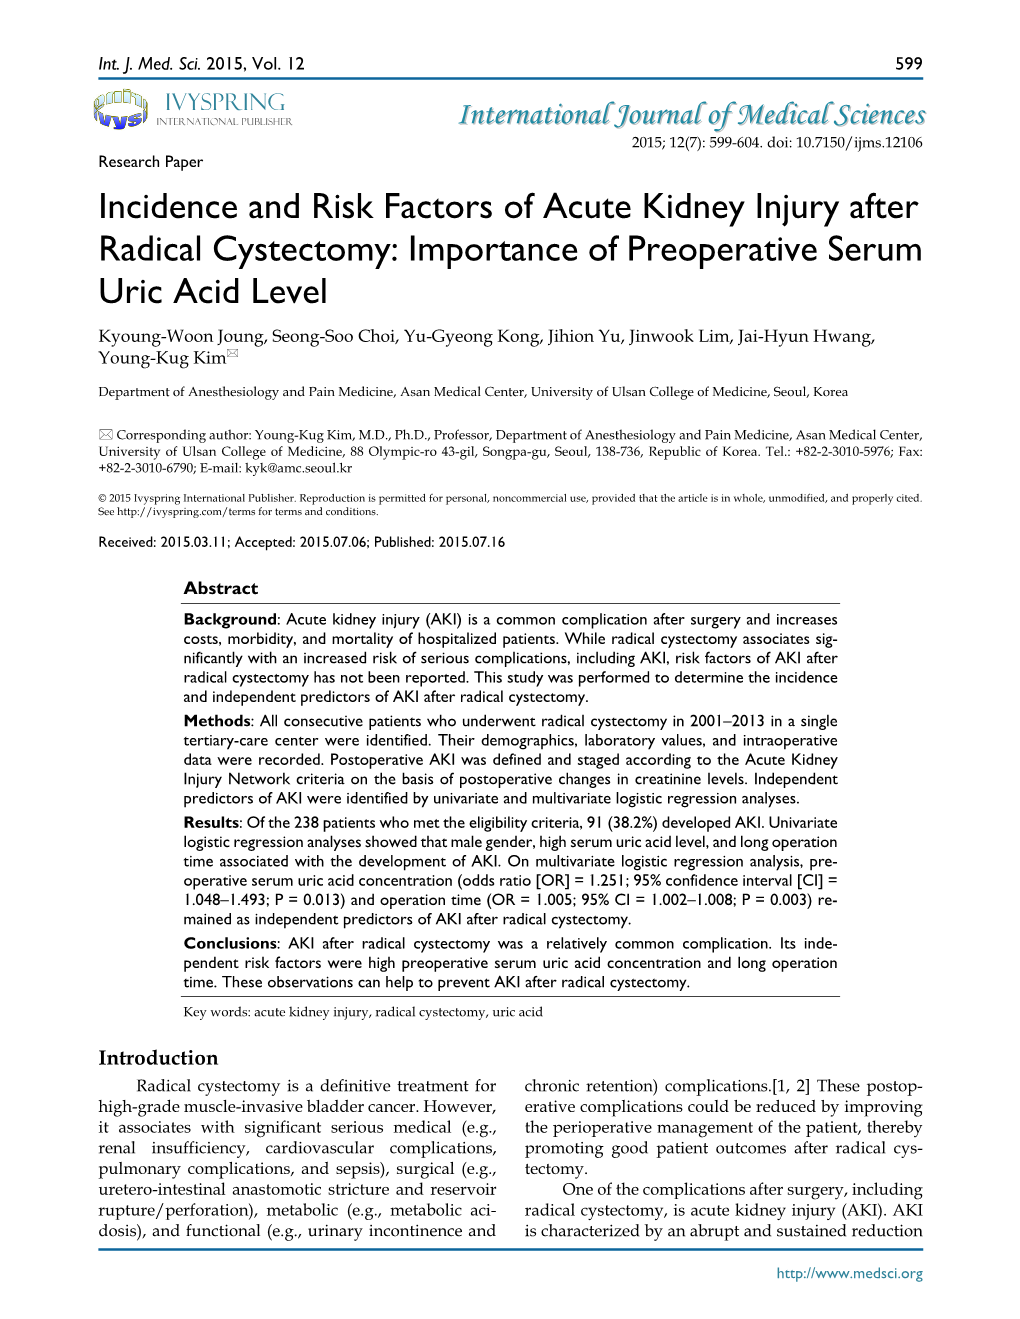 Incidence and Risk Factors of Acute Kidney Injury After Radical